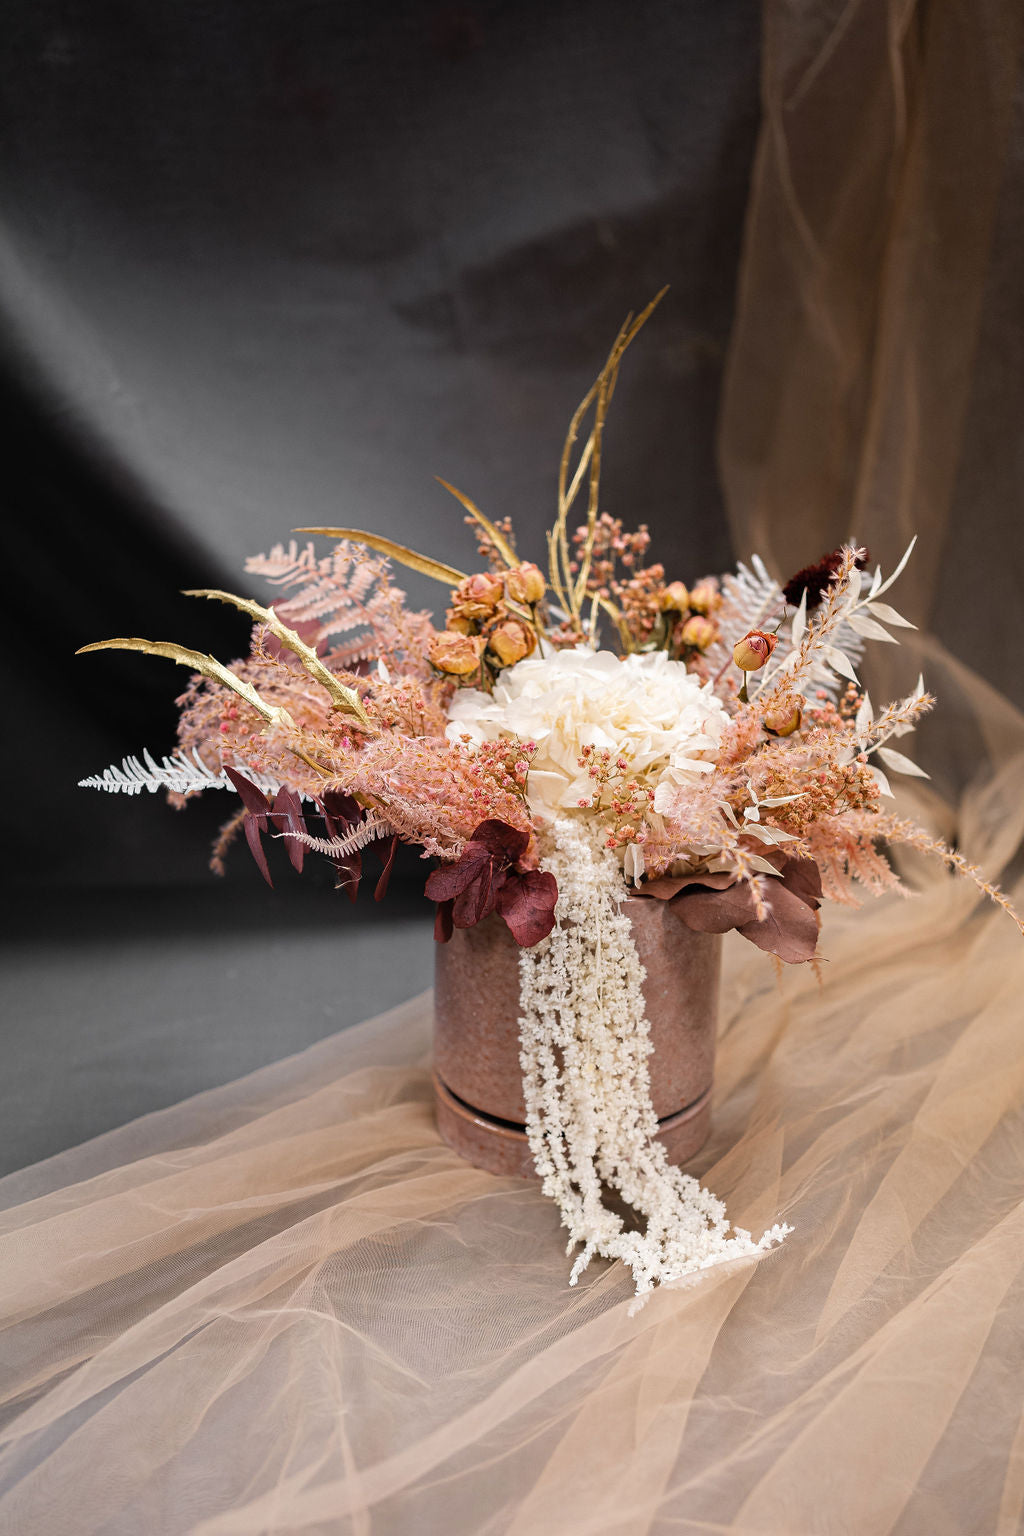 Floral designs made especially for you!